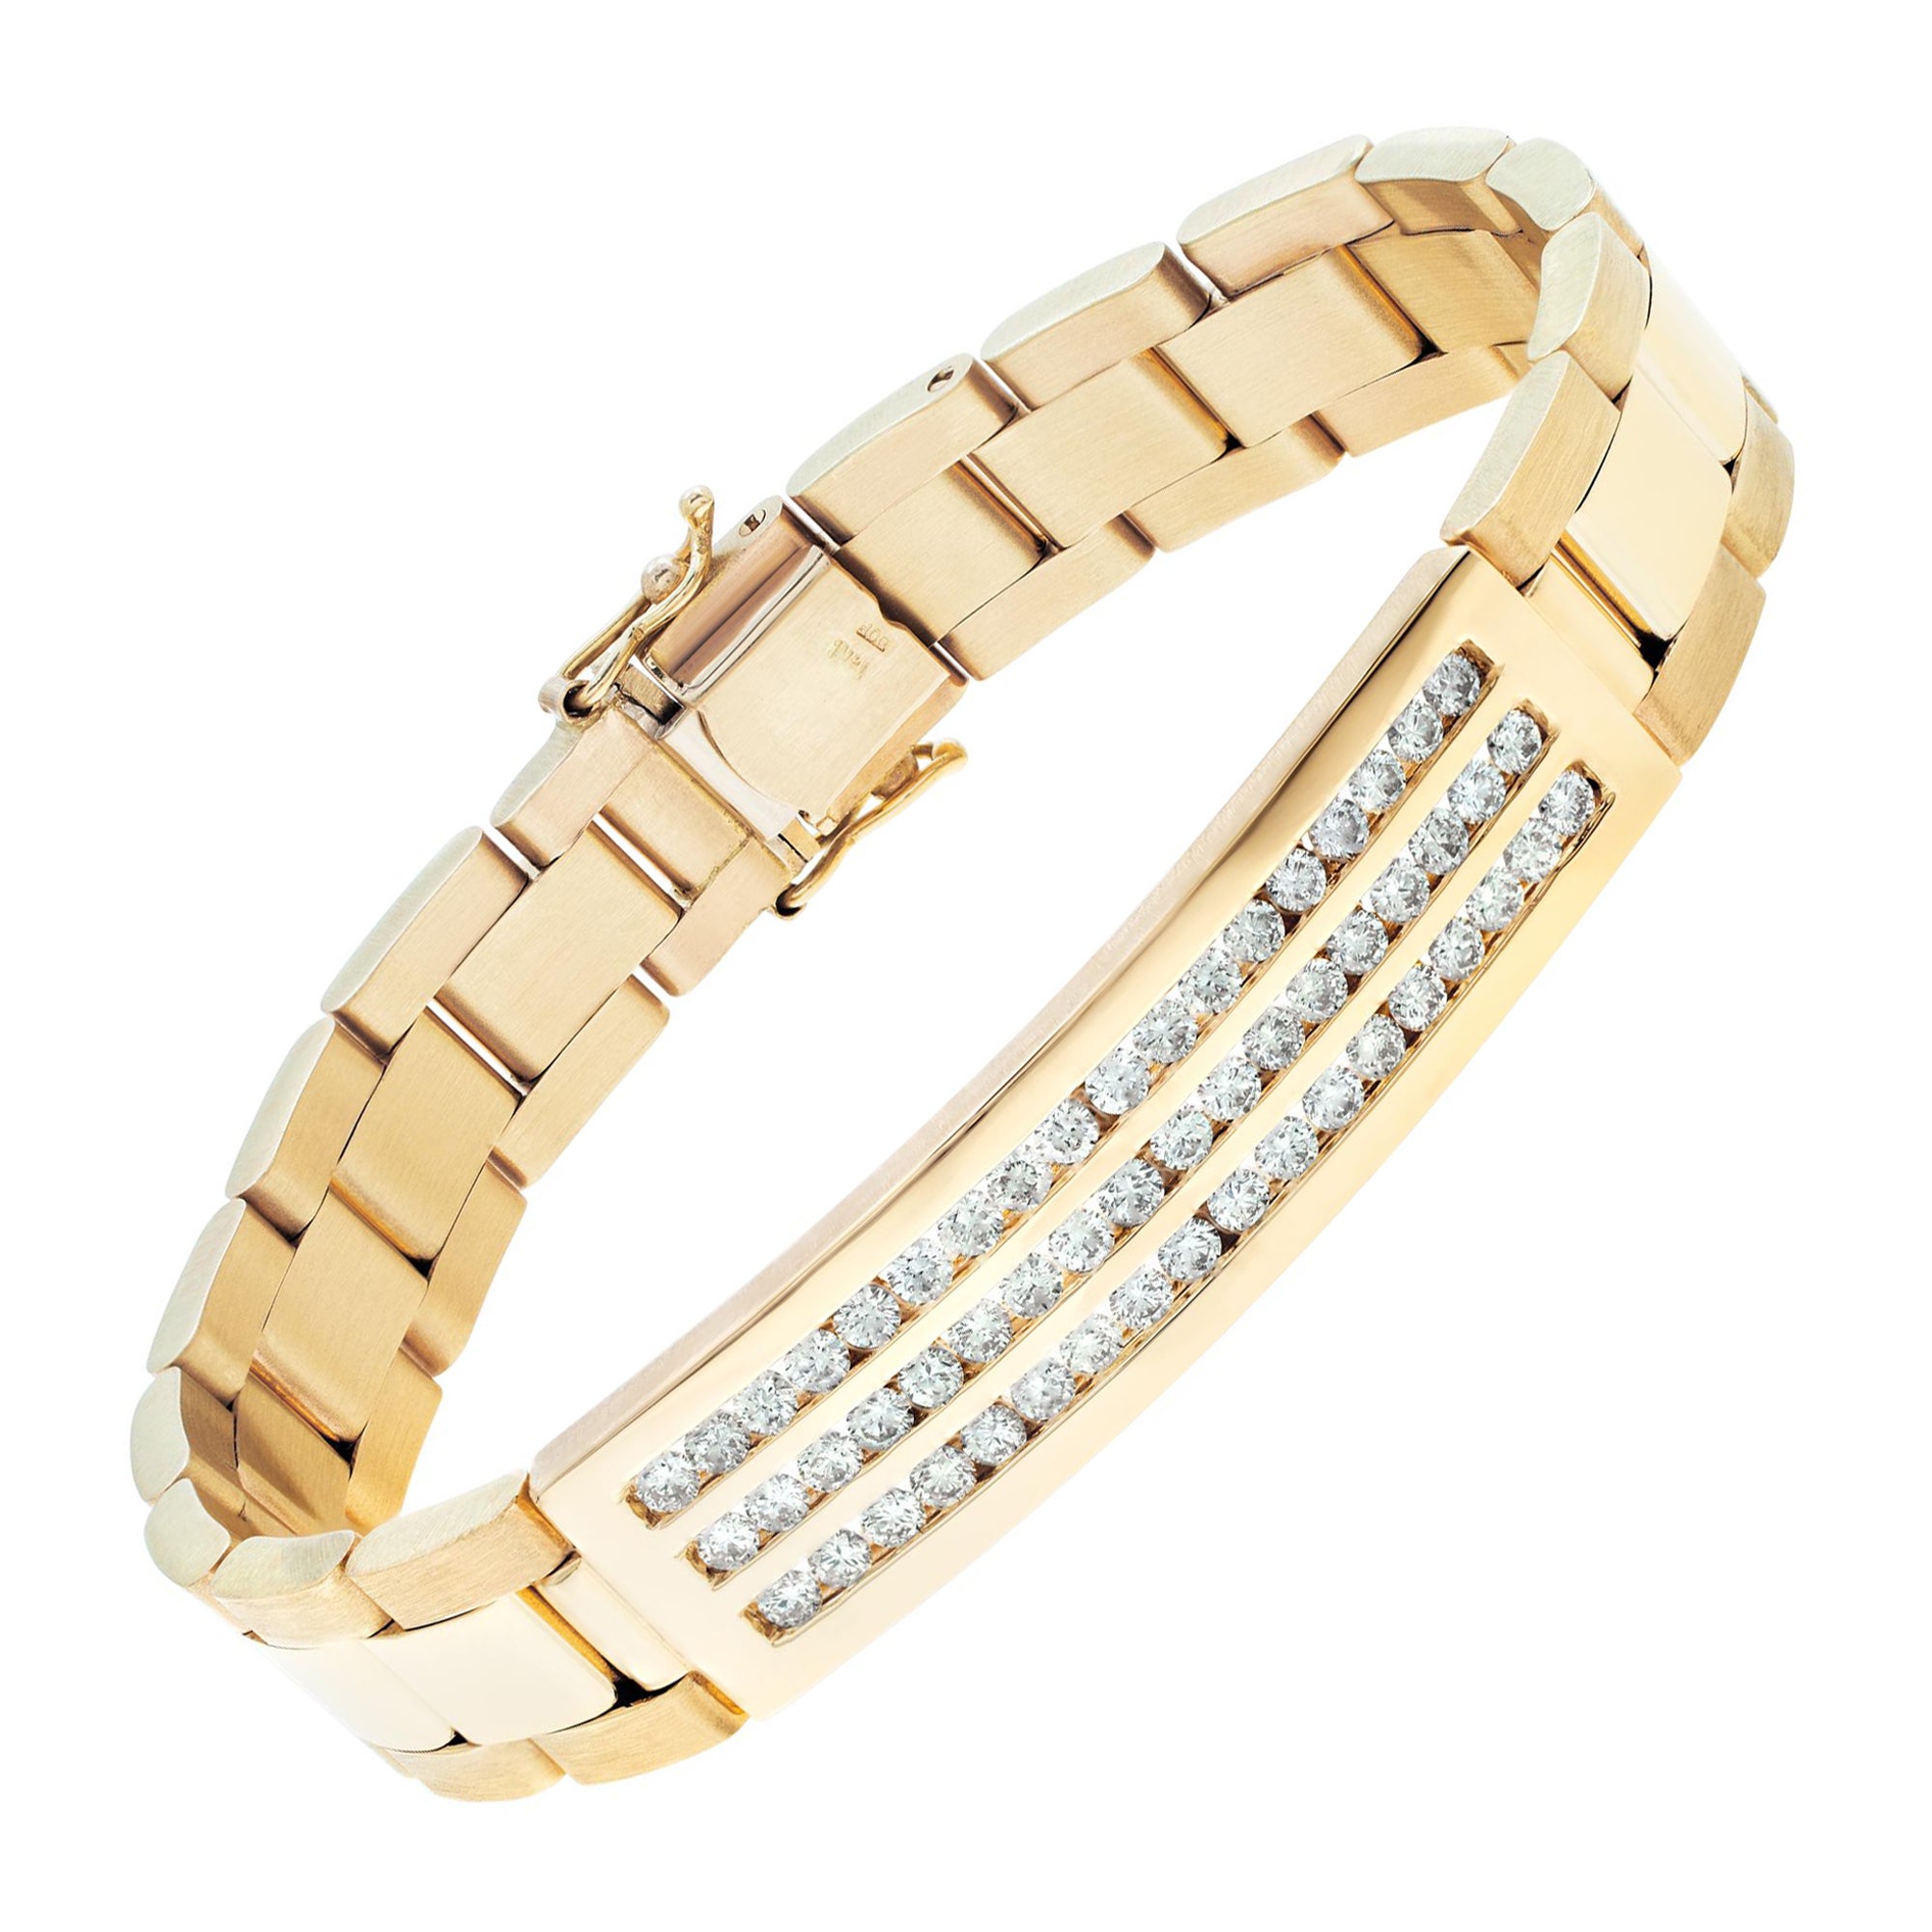 Mens yellow gold link bracelet with diamonds. For Sale